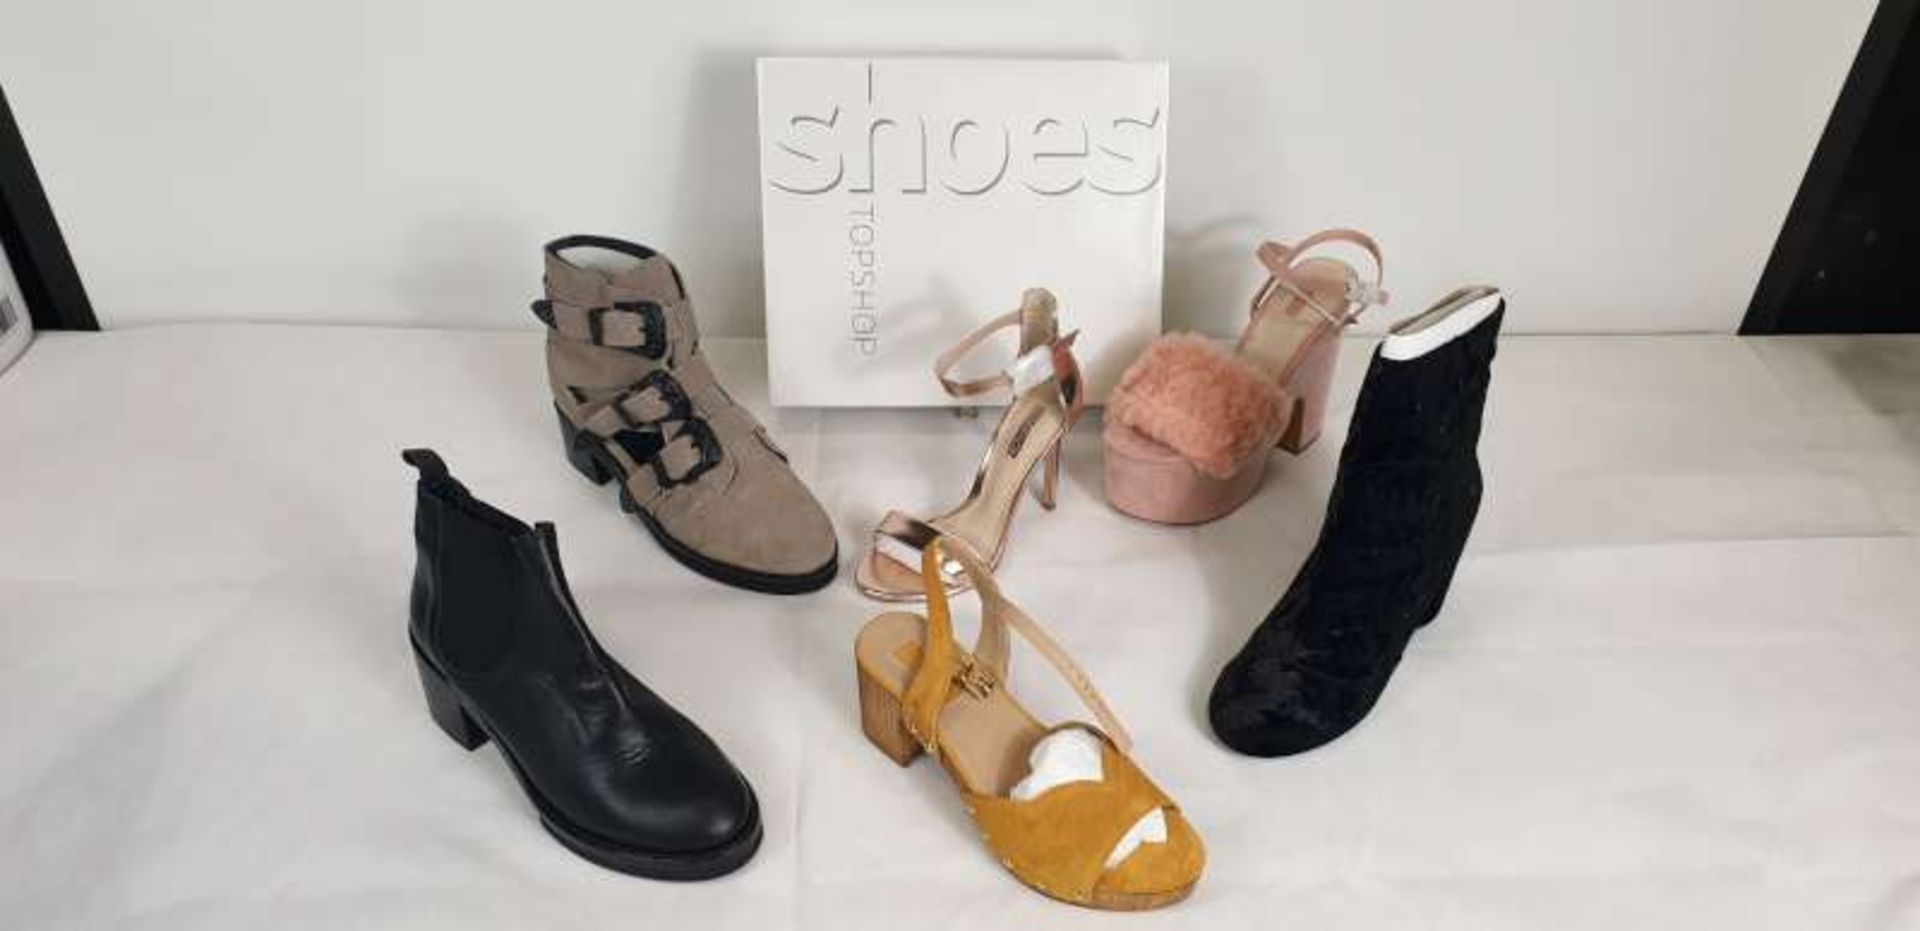 10 X BRAND NEW LADIES TOPSHOP SHOES IN VARIOUS STYLES AND SIZES, TOTAL RRP £350 - £400